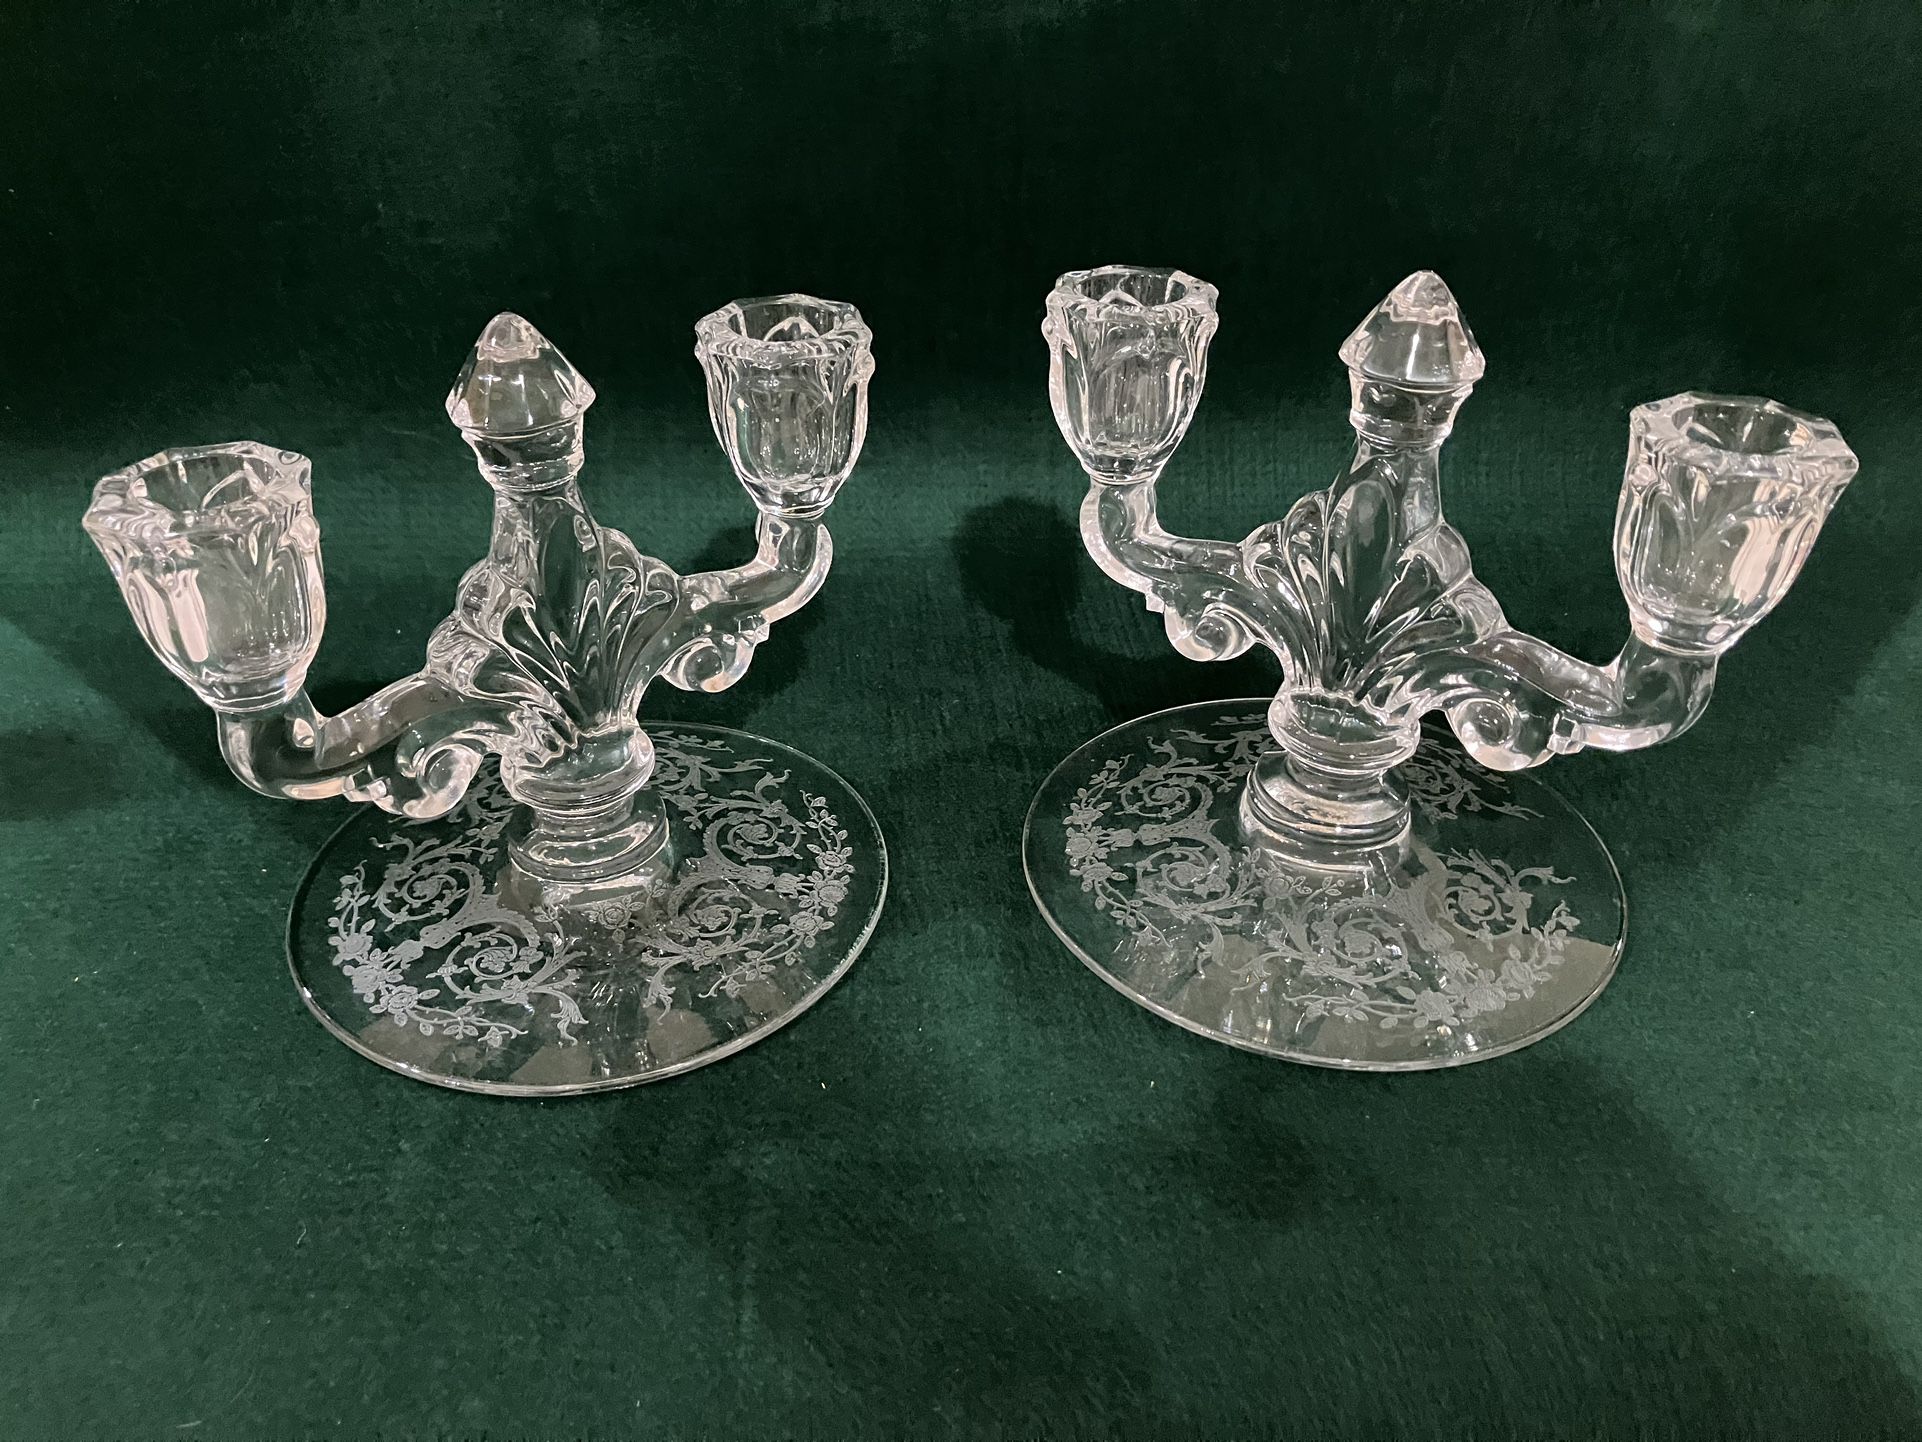 Matched Pair/Embossed Pressed Glass Double Candelabras